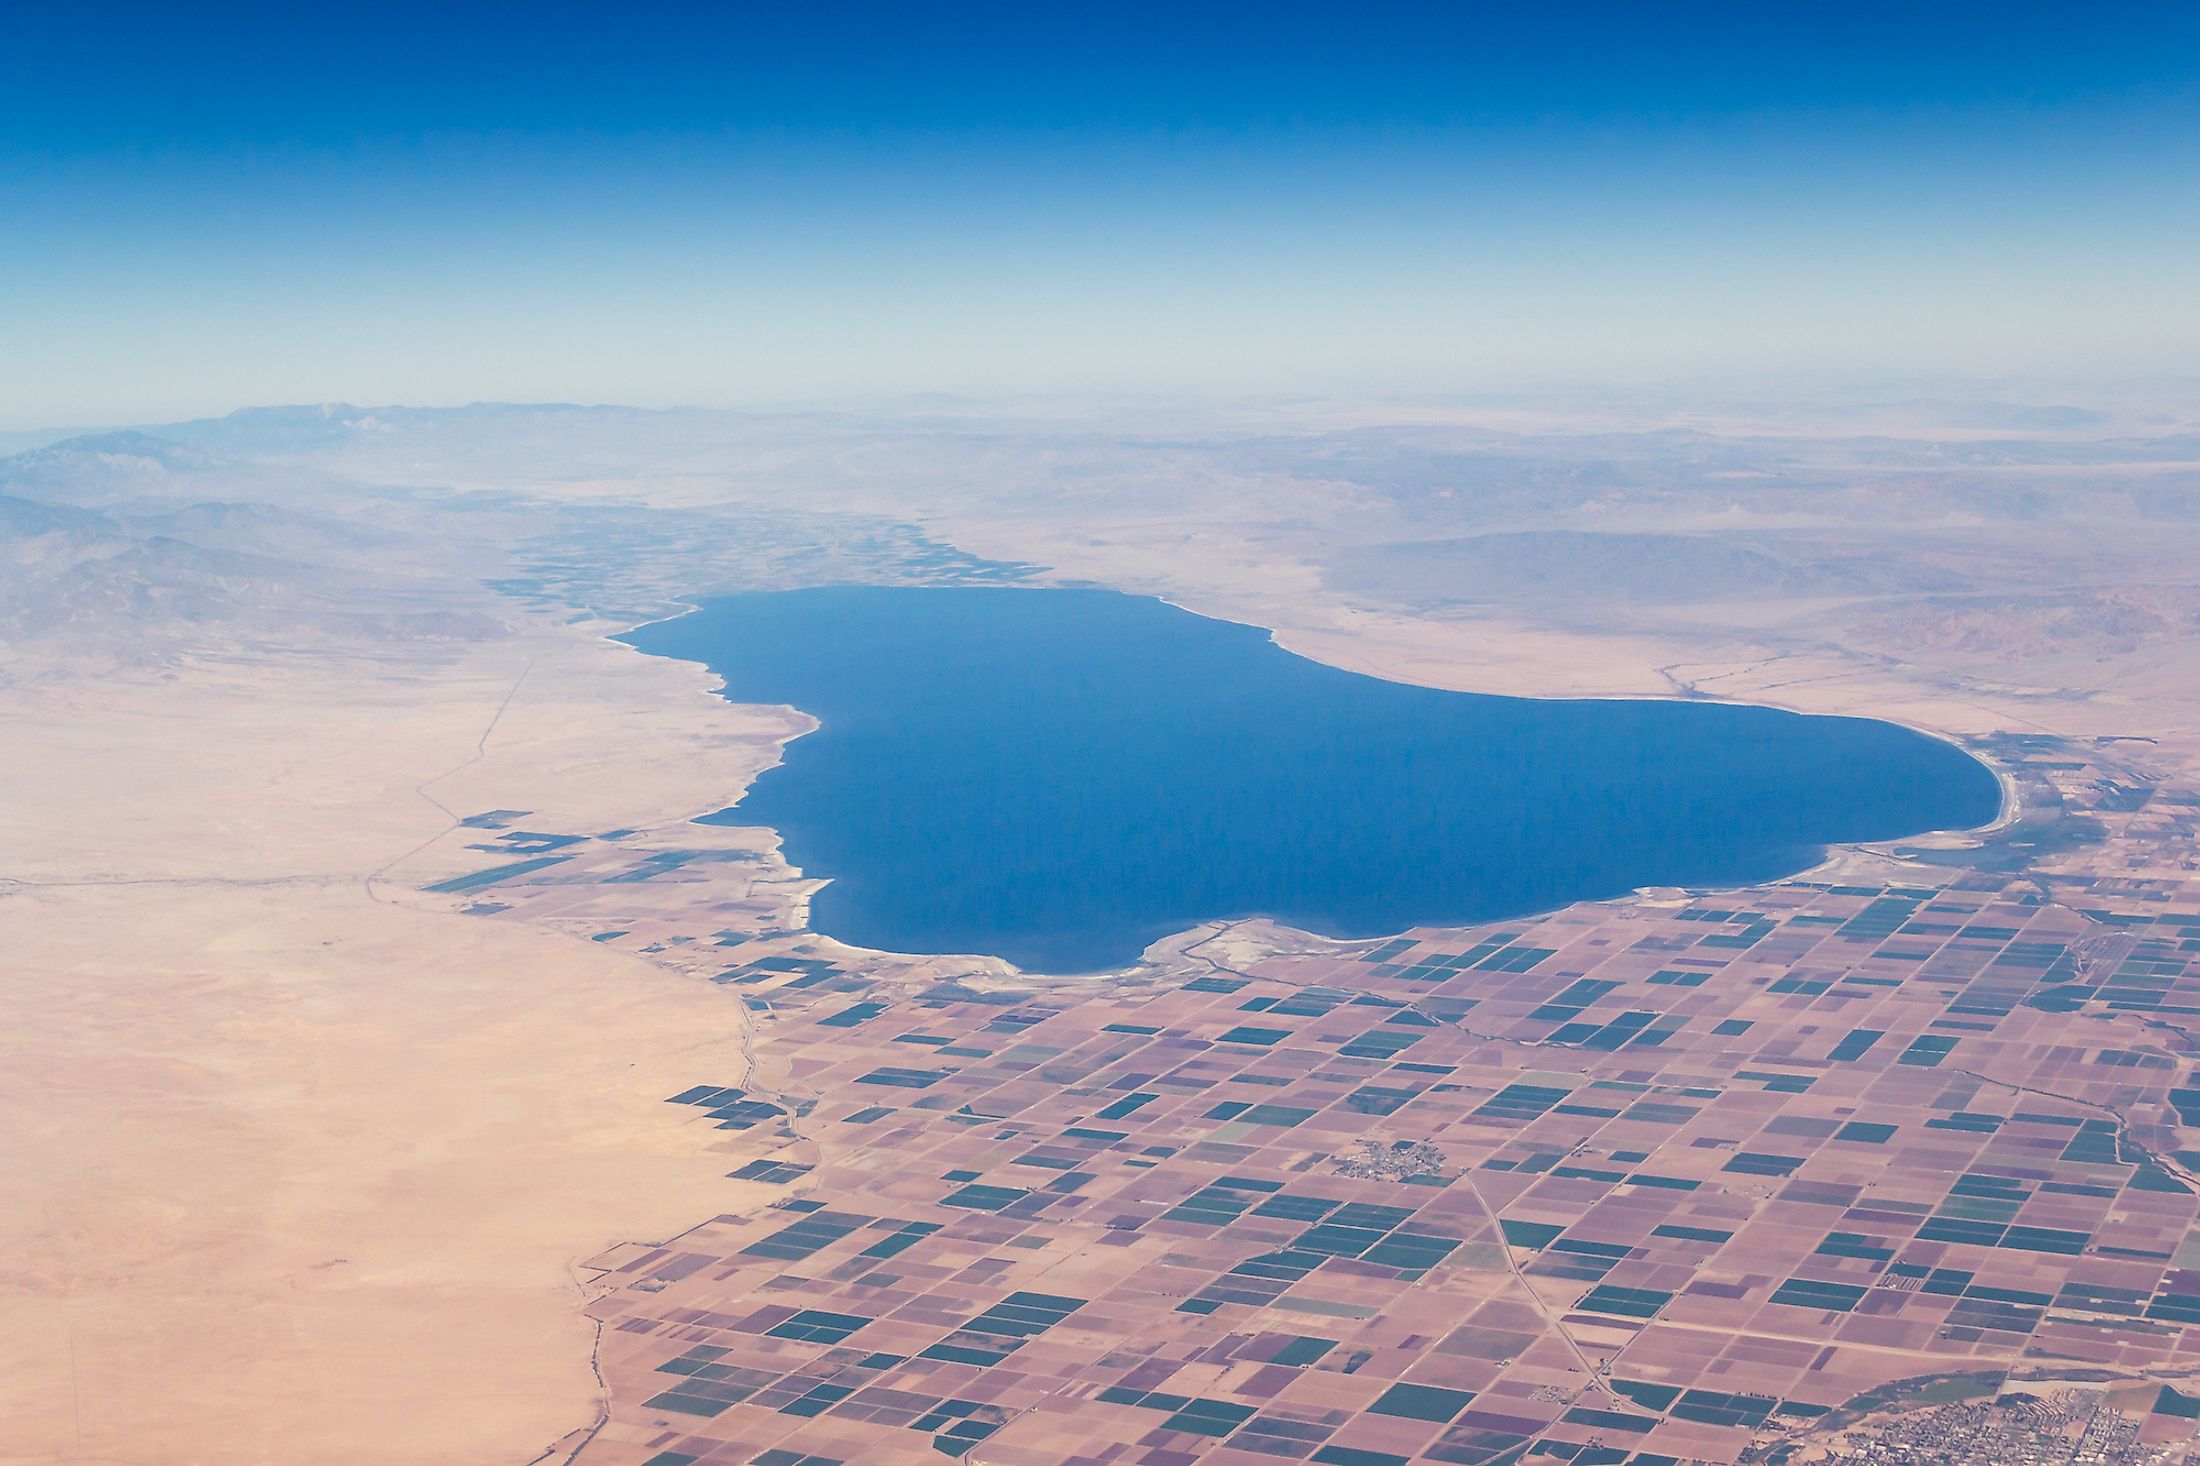 The aerial view of Salton Sea in California, USA. The New River drains into this sea.